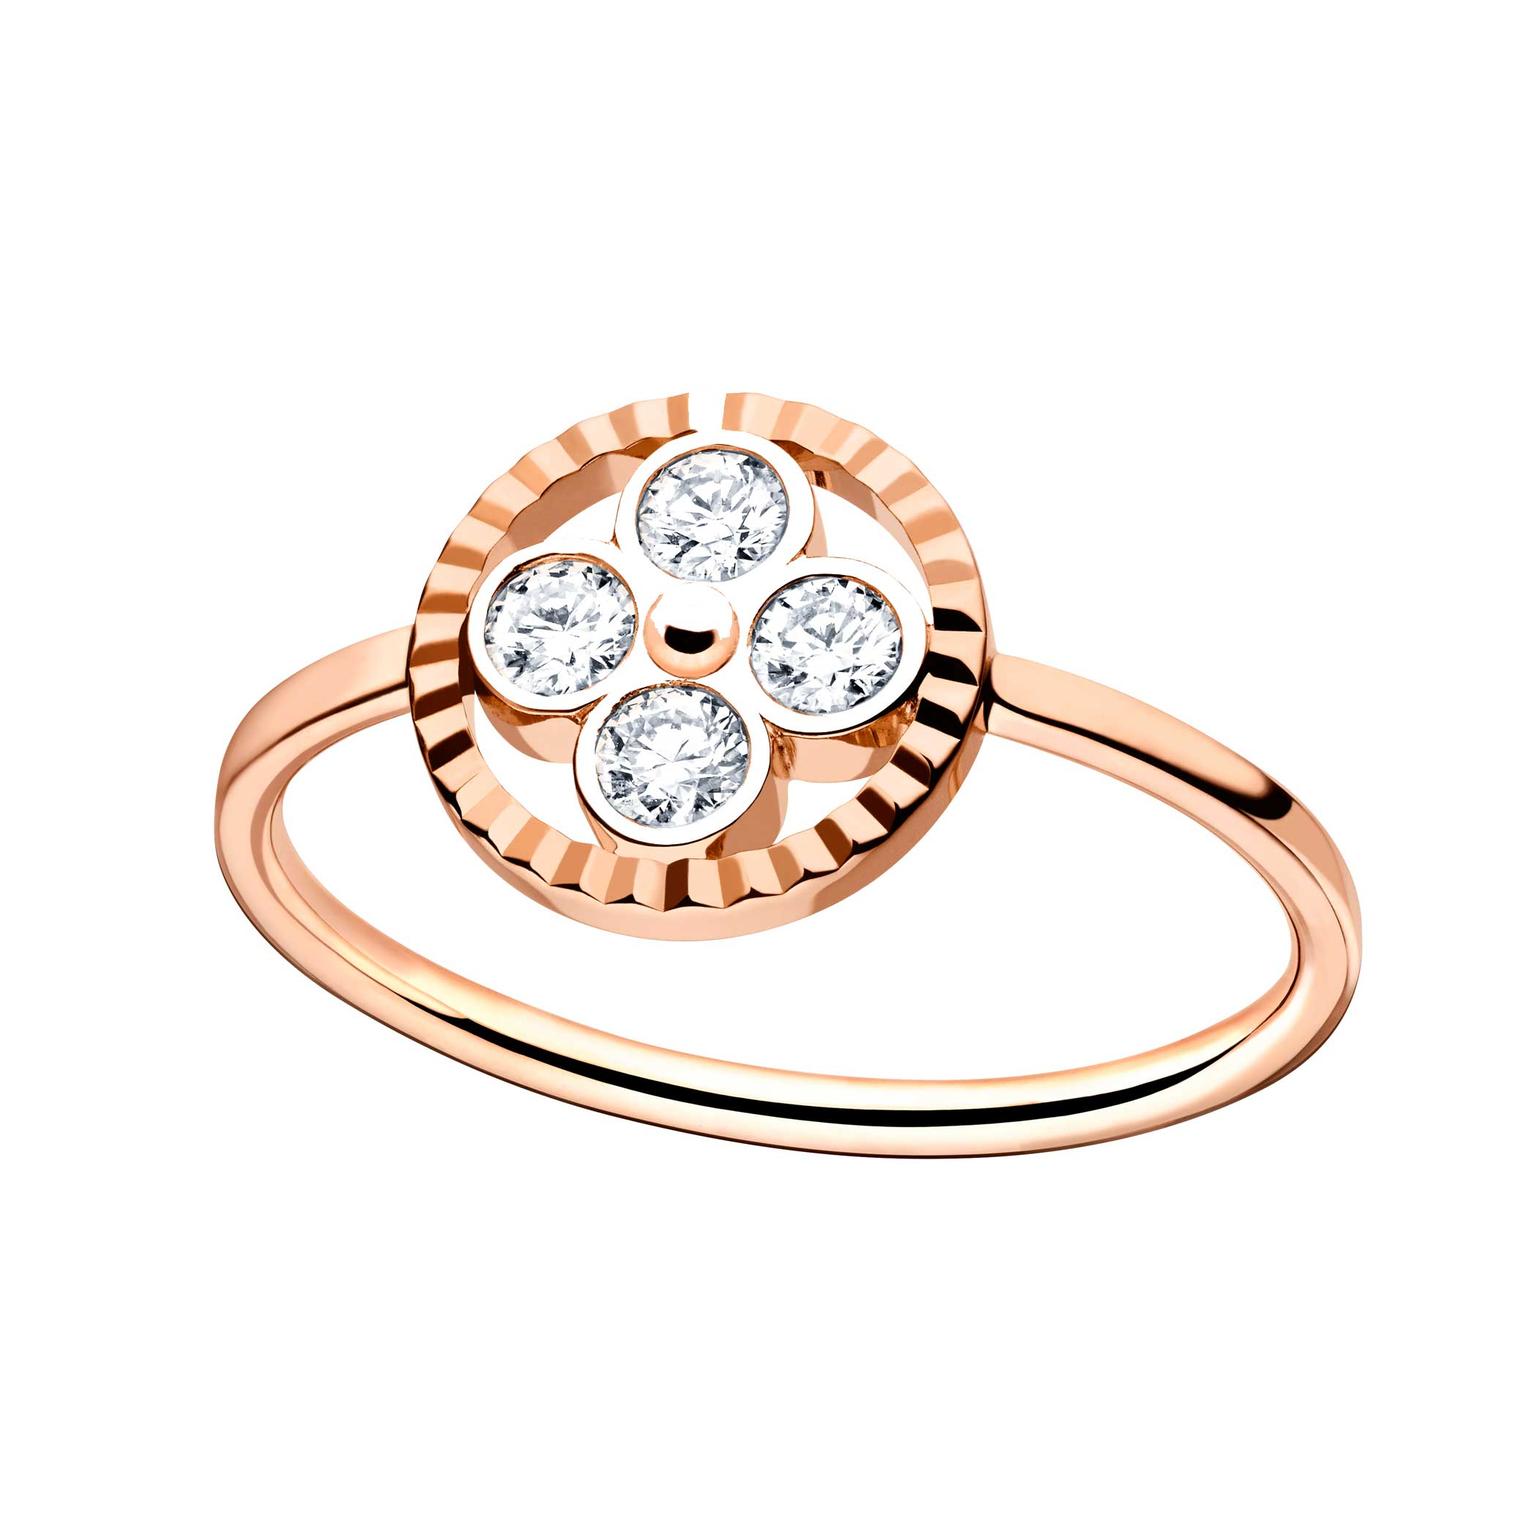 Louis Vuitton Star Blossom Ring In Pink Gold And Diamonds